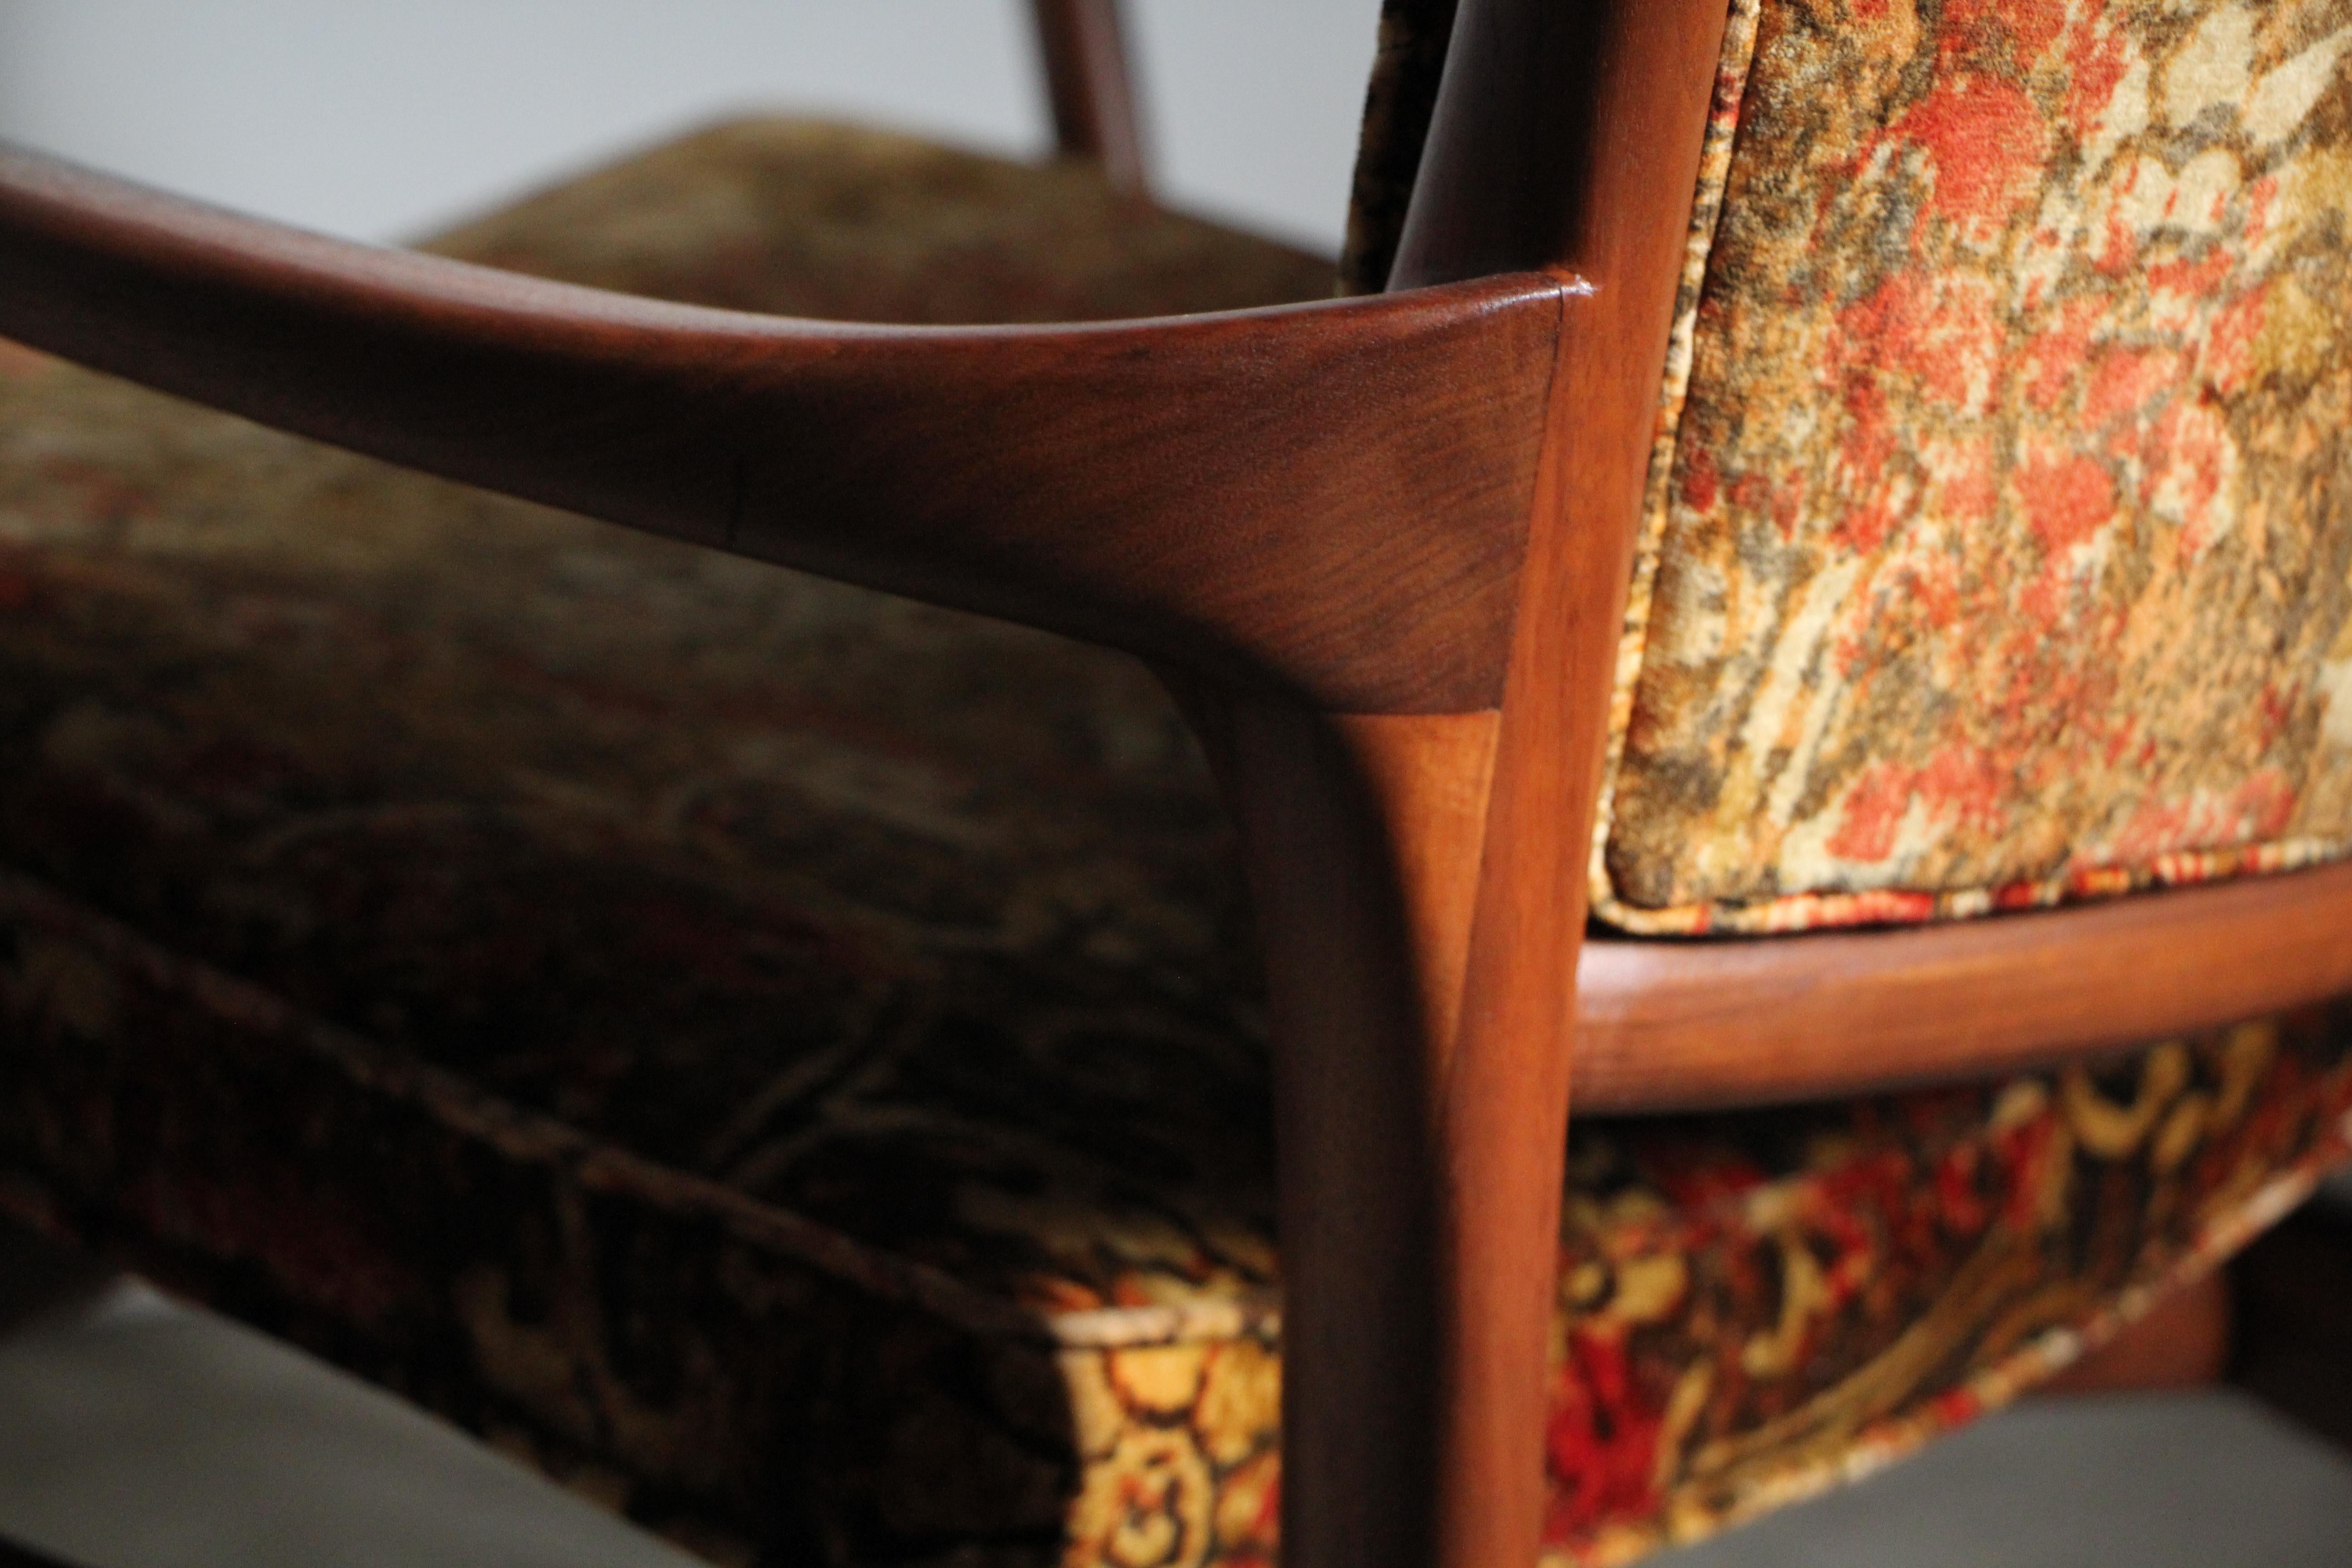 Fabric Very Rare Model 175-C Sculptured Lounge Armchair by Vladimir Kagan, c 1950s For Sale